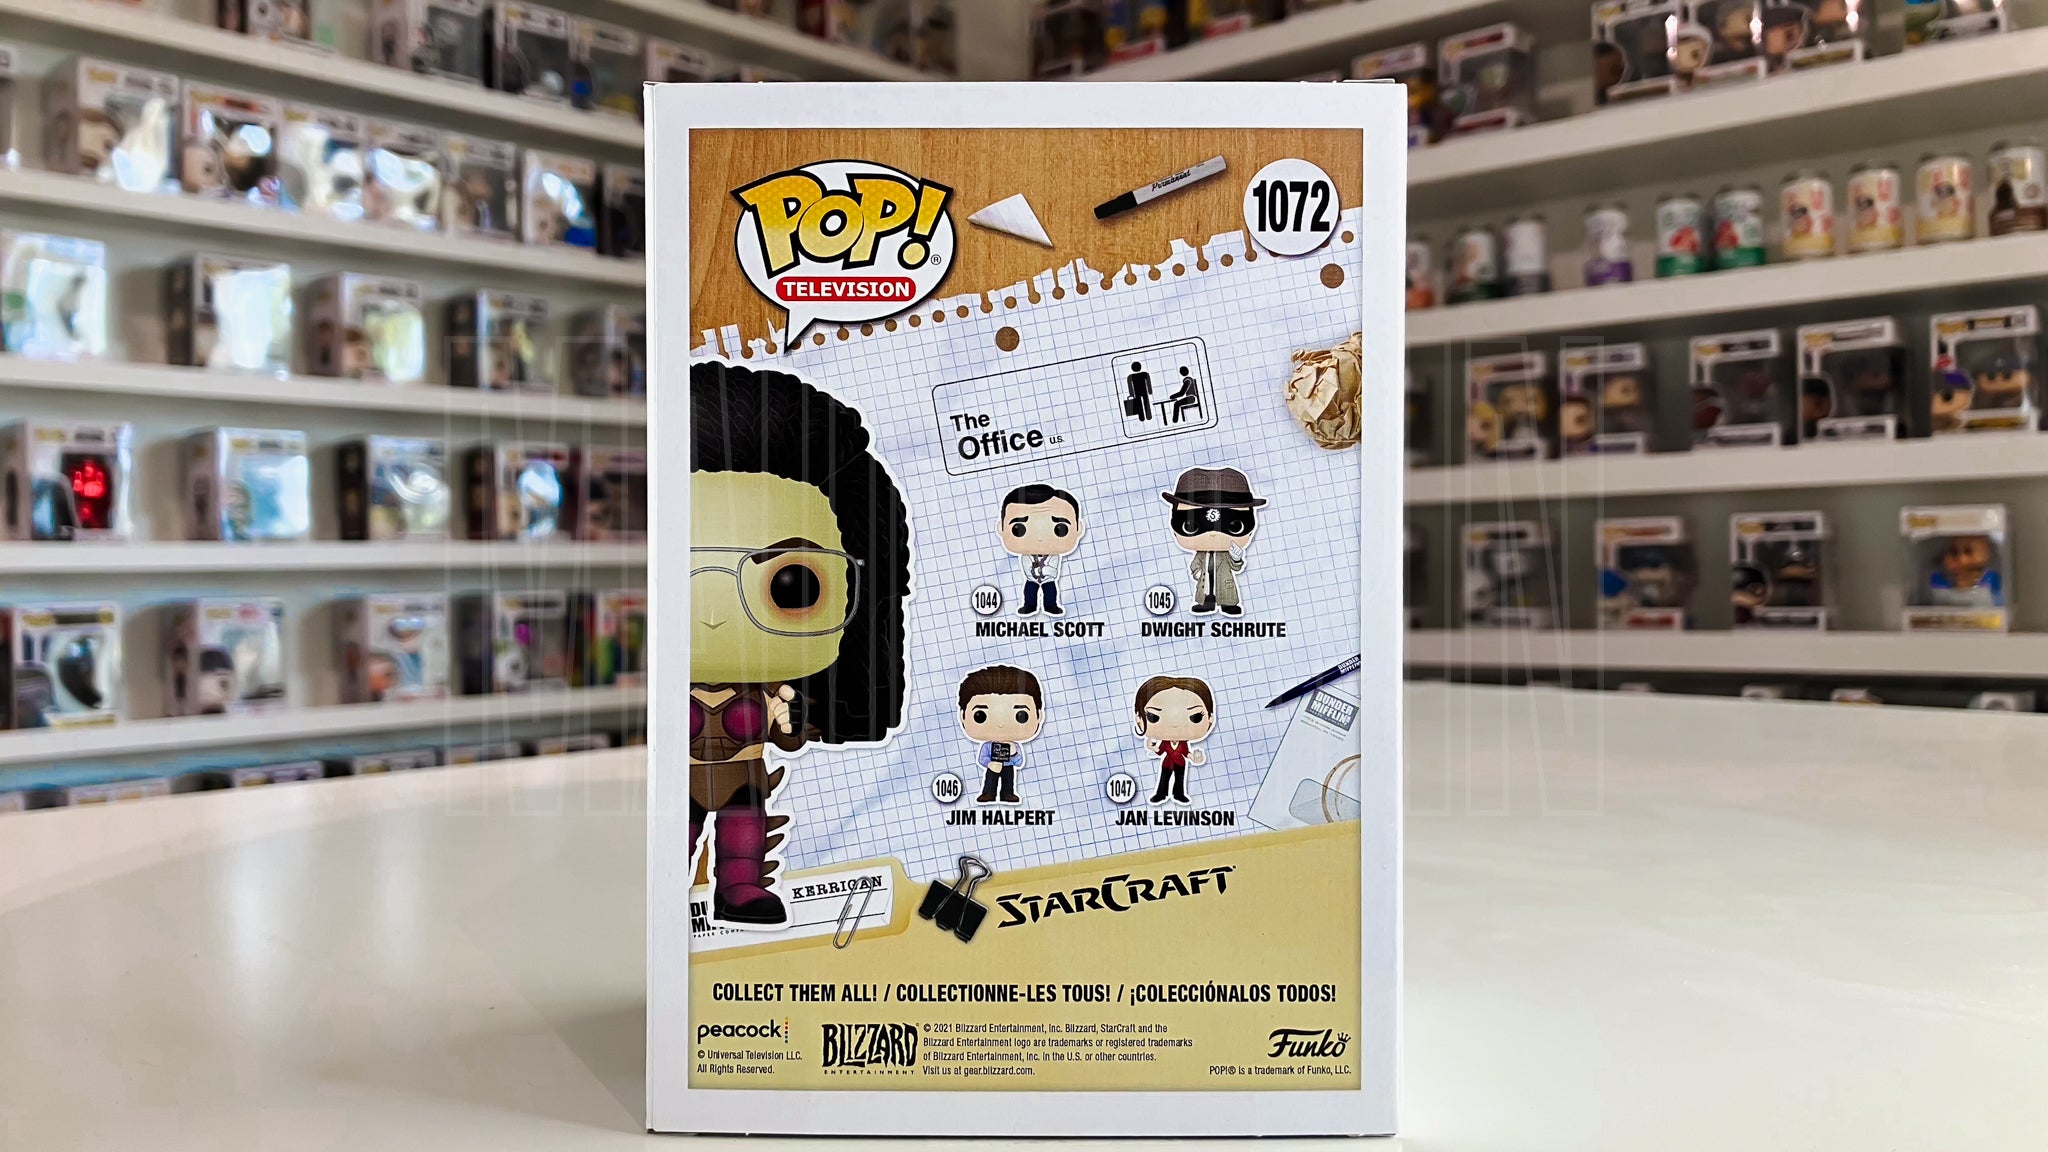 Funko Pop TV NBC The Office Dwight Schrute as Kerrigan Spring Convention ECCC 1072